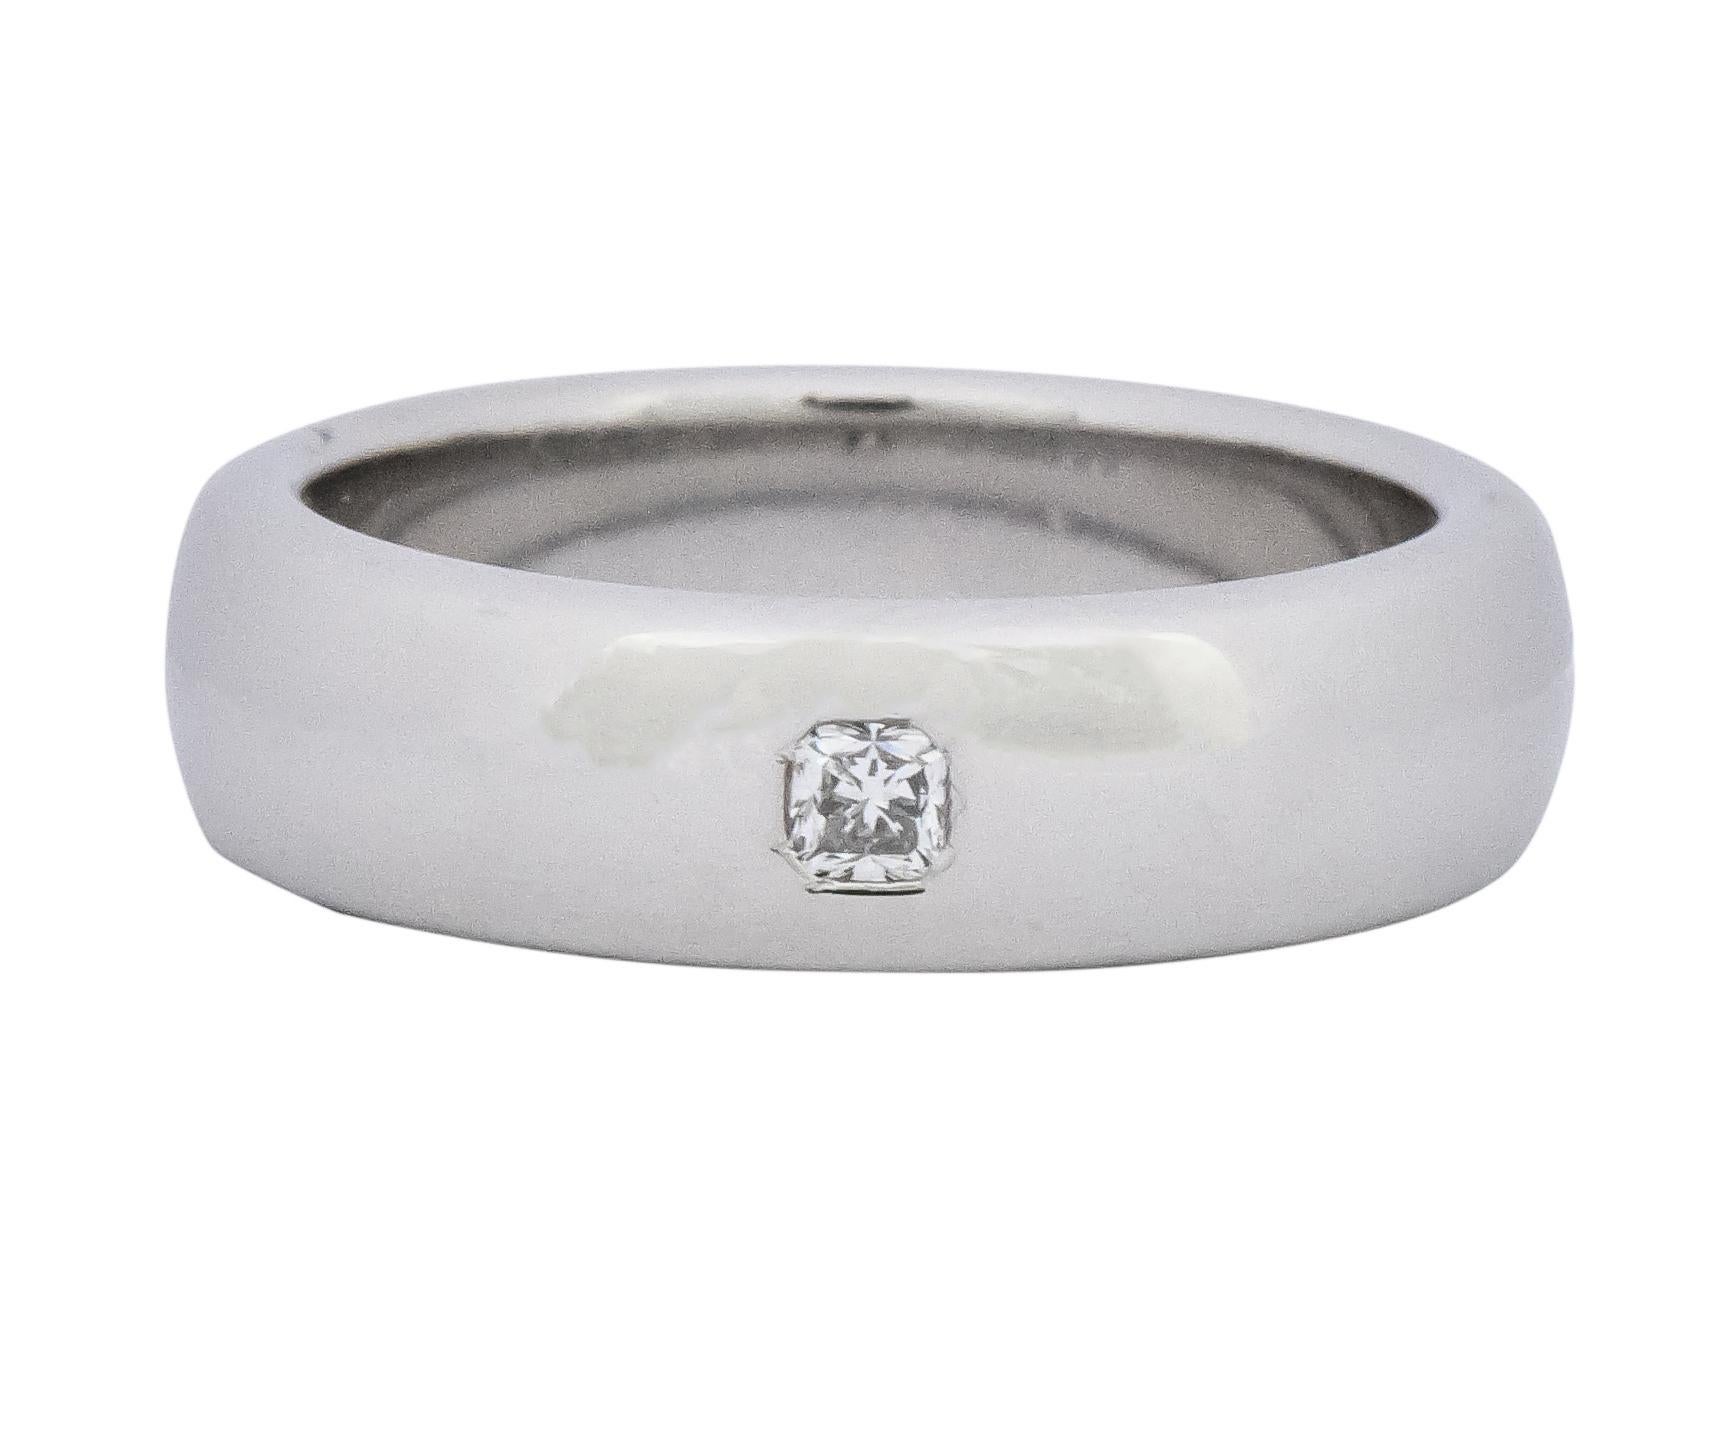 Wide band centering a Lucida cut diamond weighing approximately 0.20 carat, G color and VS clarity

Flush set in a high polished platinum band

Fully signed Tiffany & Co. Lucida, Pat. 5970744 et al, and stamped PT 950

Ring Size: 8 (complimentary